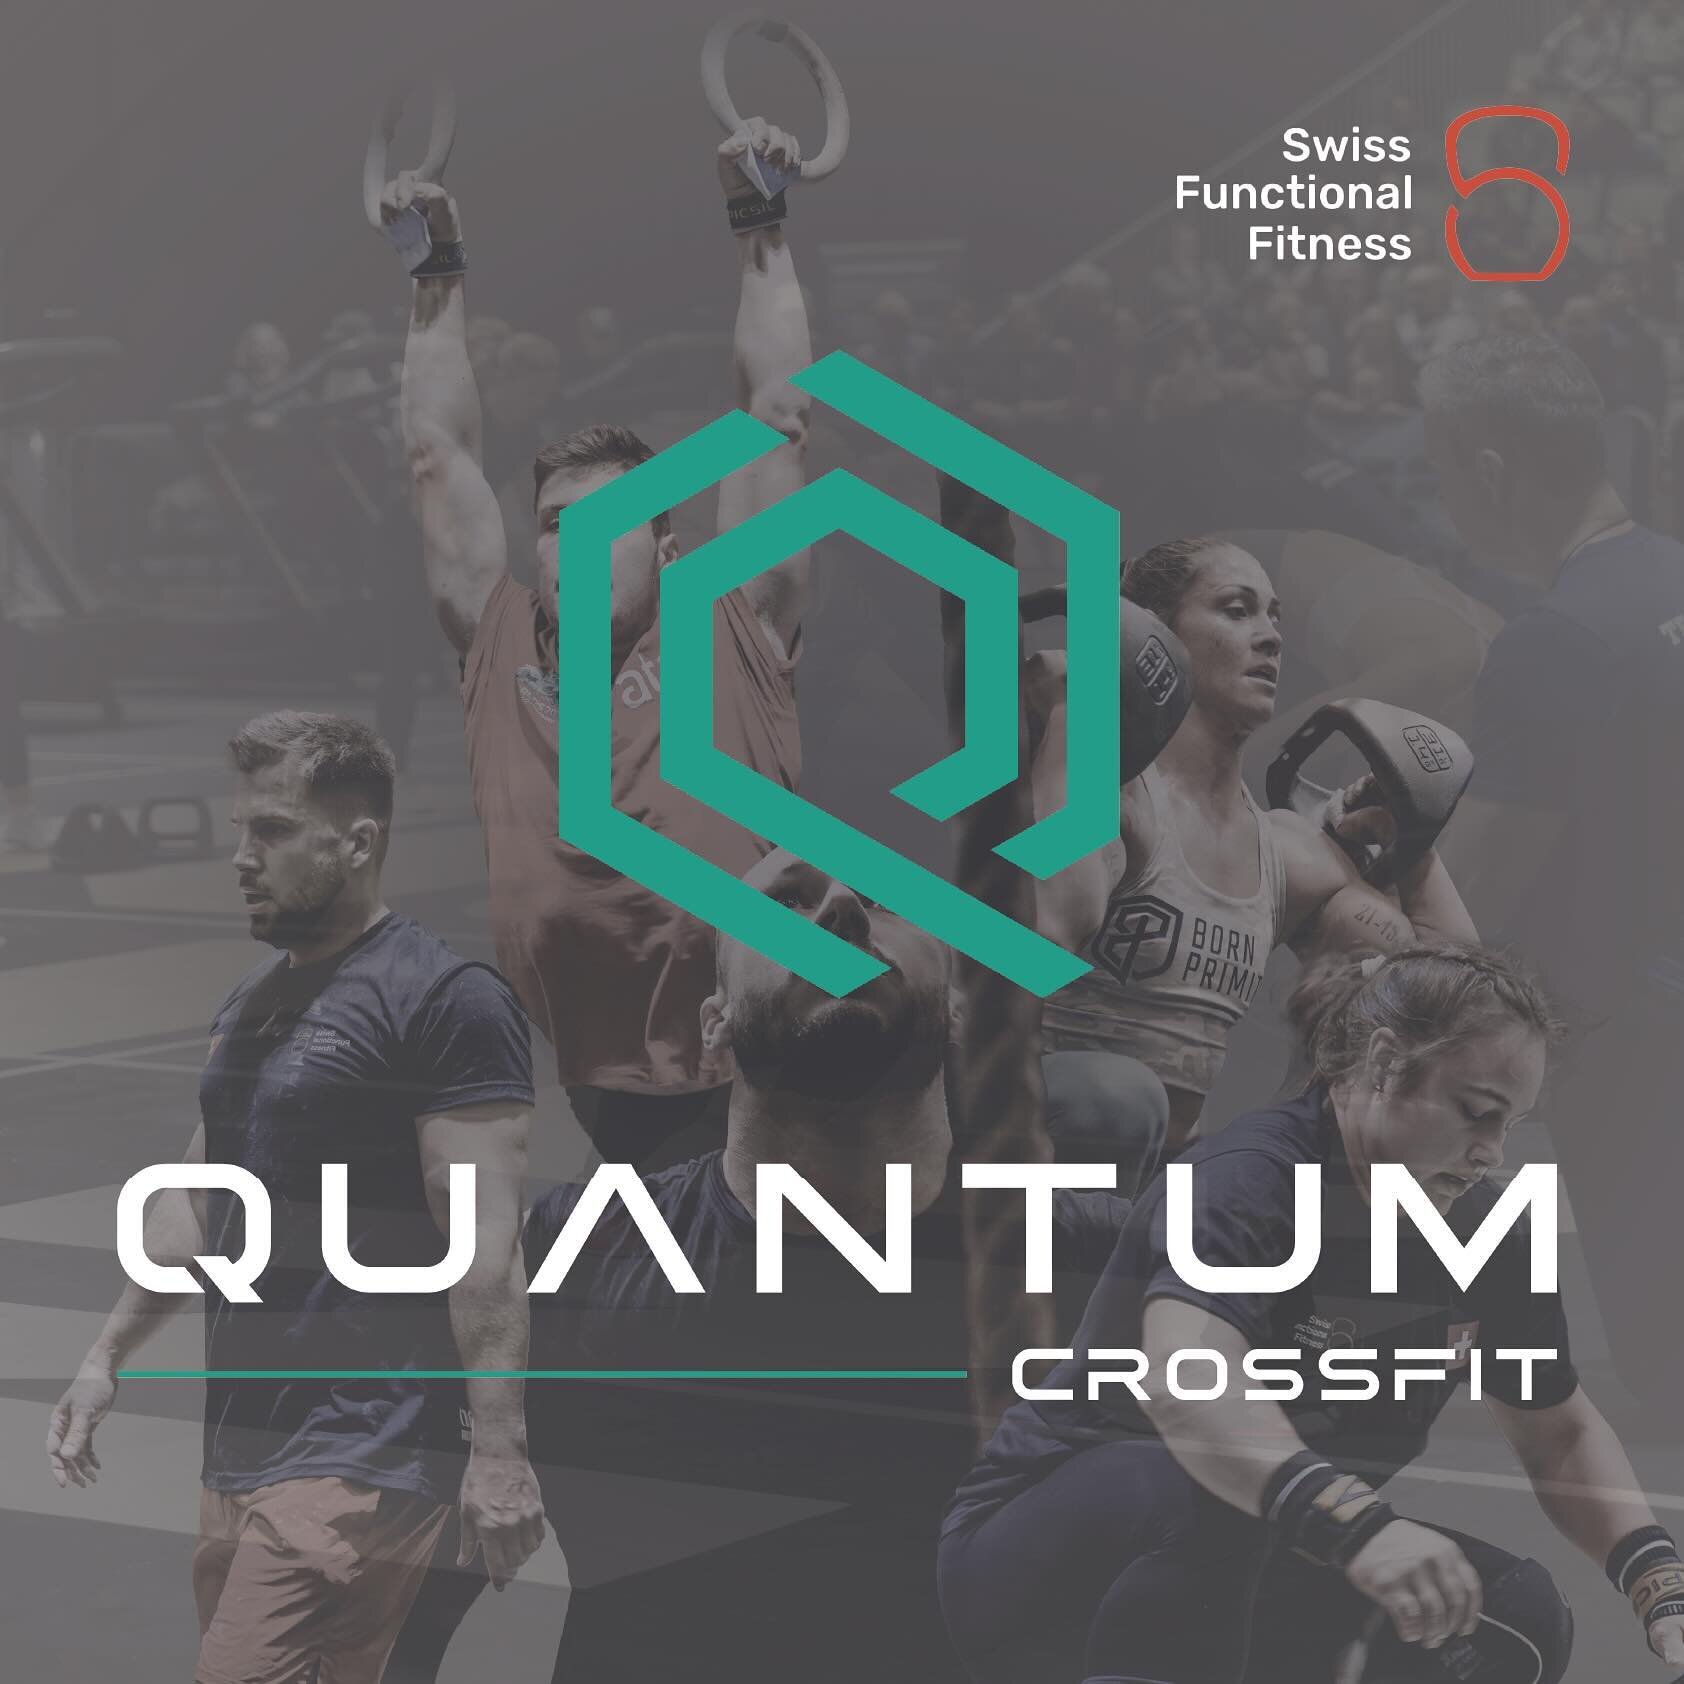 We&rsquo;re thrilled to announce the host of the 2024 Swiss Championship - @quantumcrossfit in Effretikon will be this year&rsquo;s competition floor on August 17th and 18th. You have until April 30th to submit your online qualifiers and secure your 